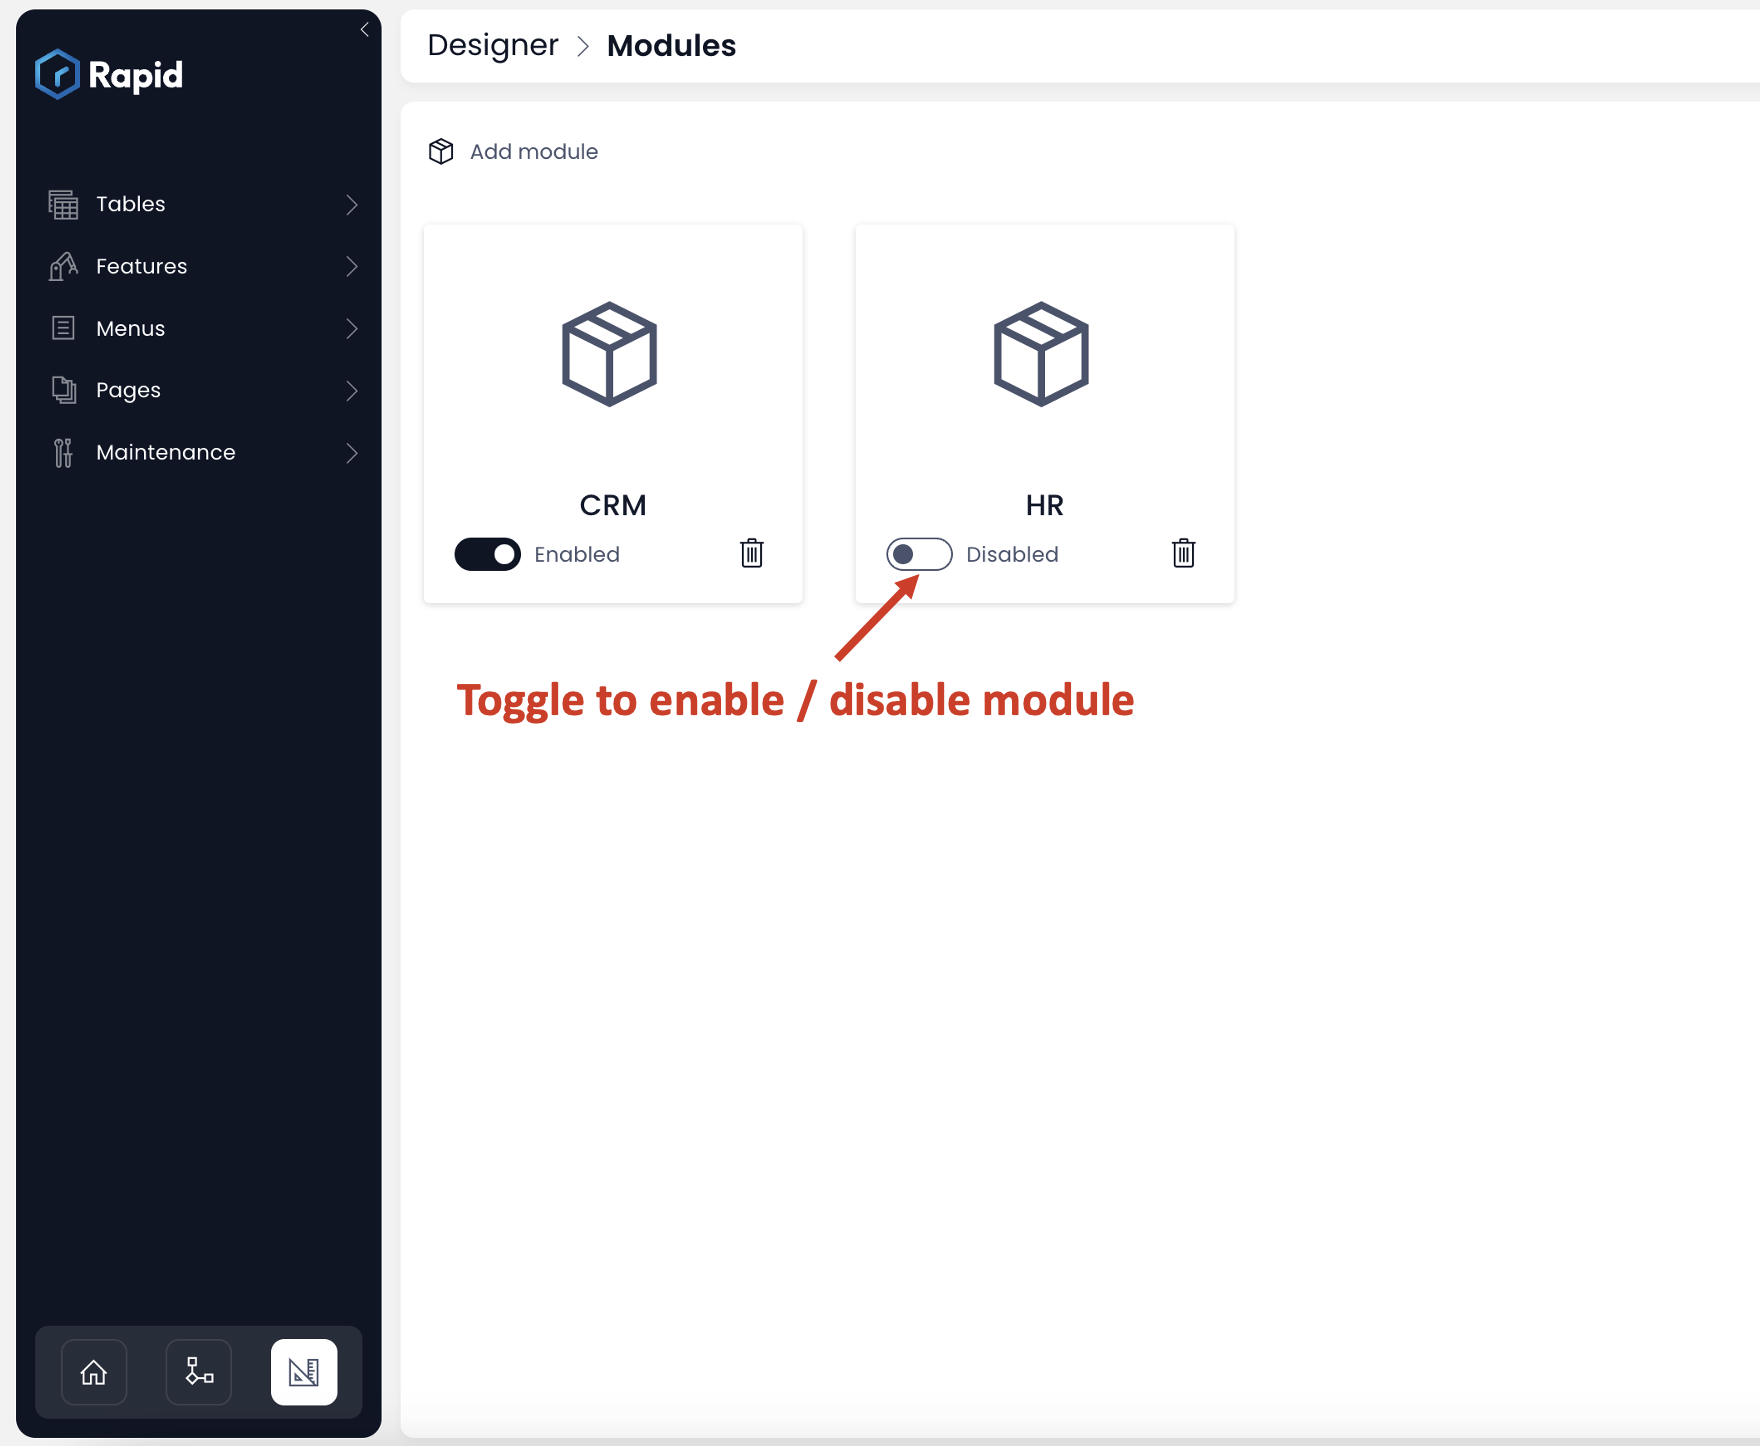 Image showing how to toggle modules to enable / disable them